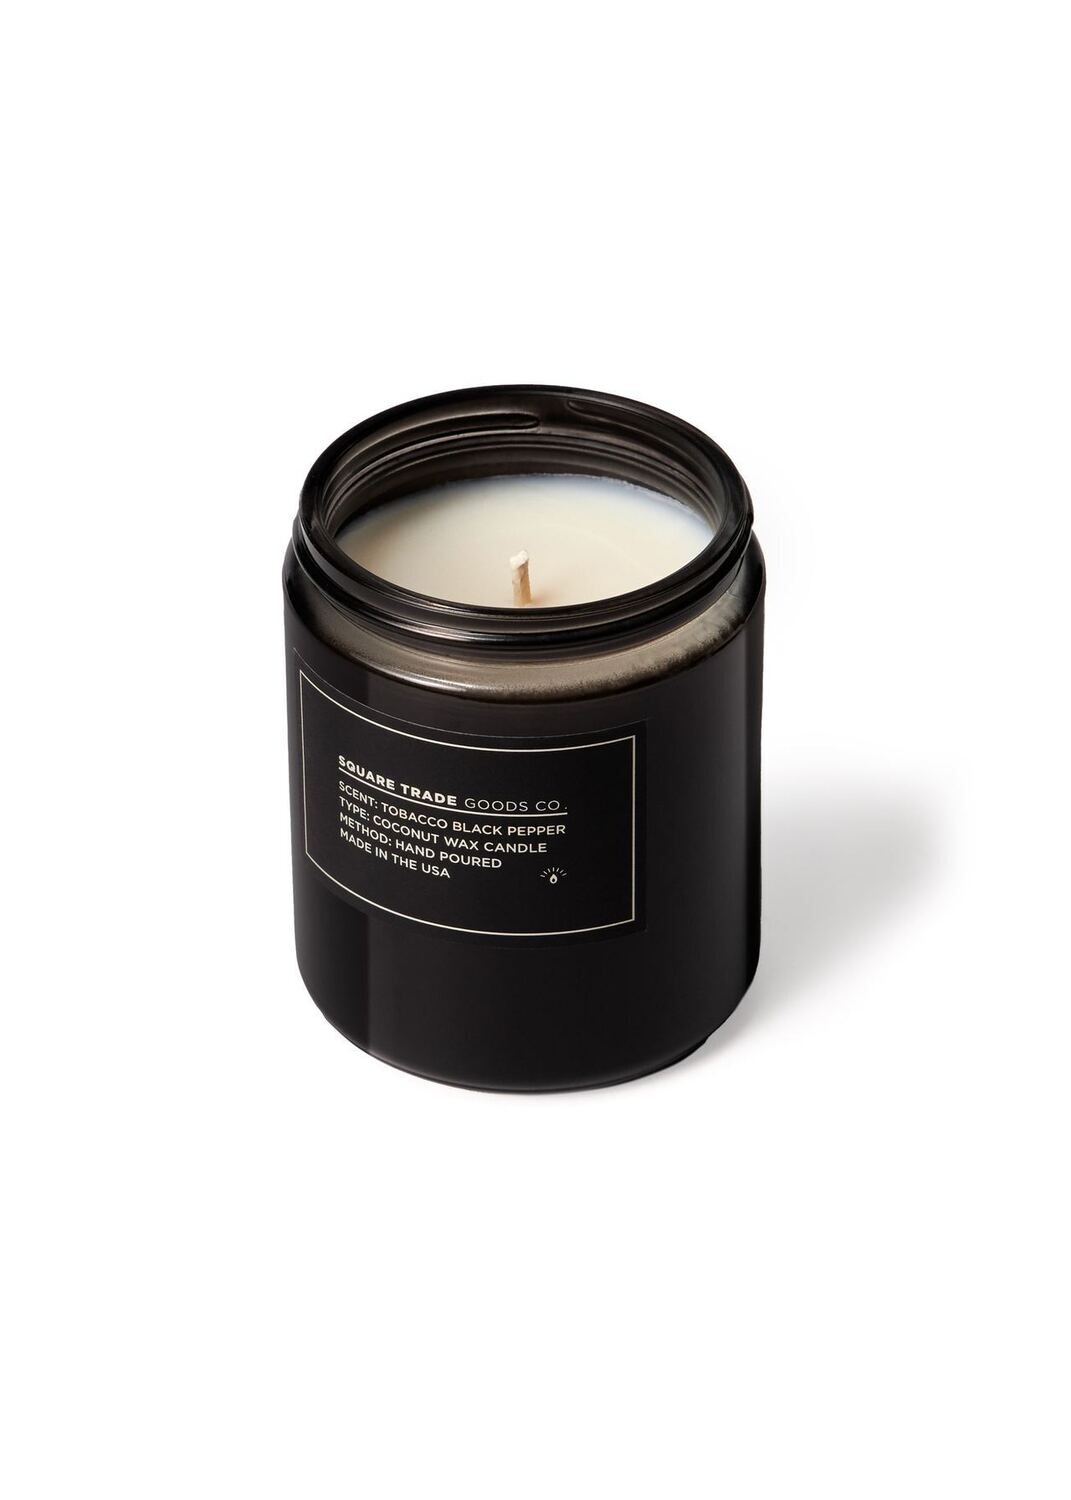 8oz Hand Poured Soy Candle - Tobacco Black Pepper